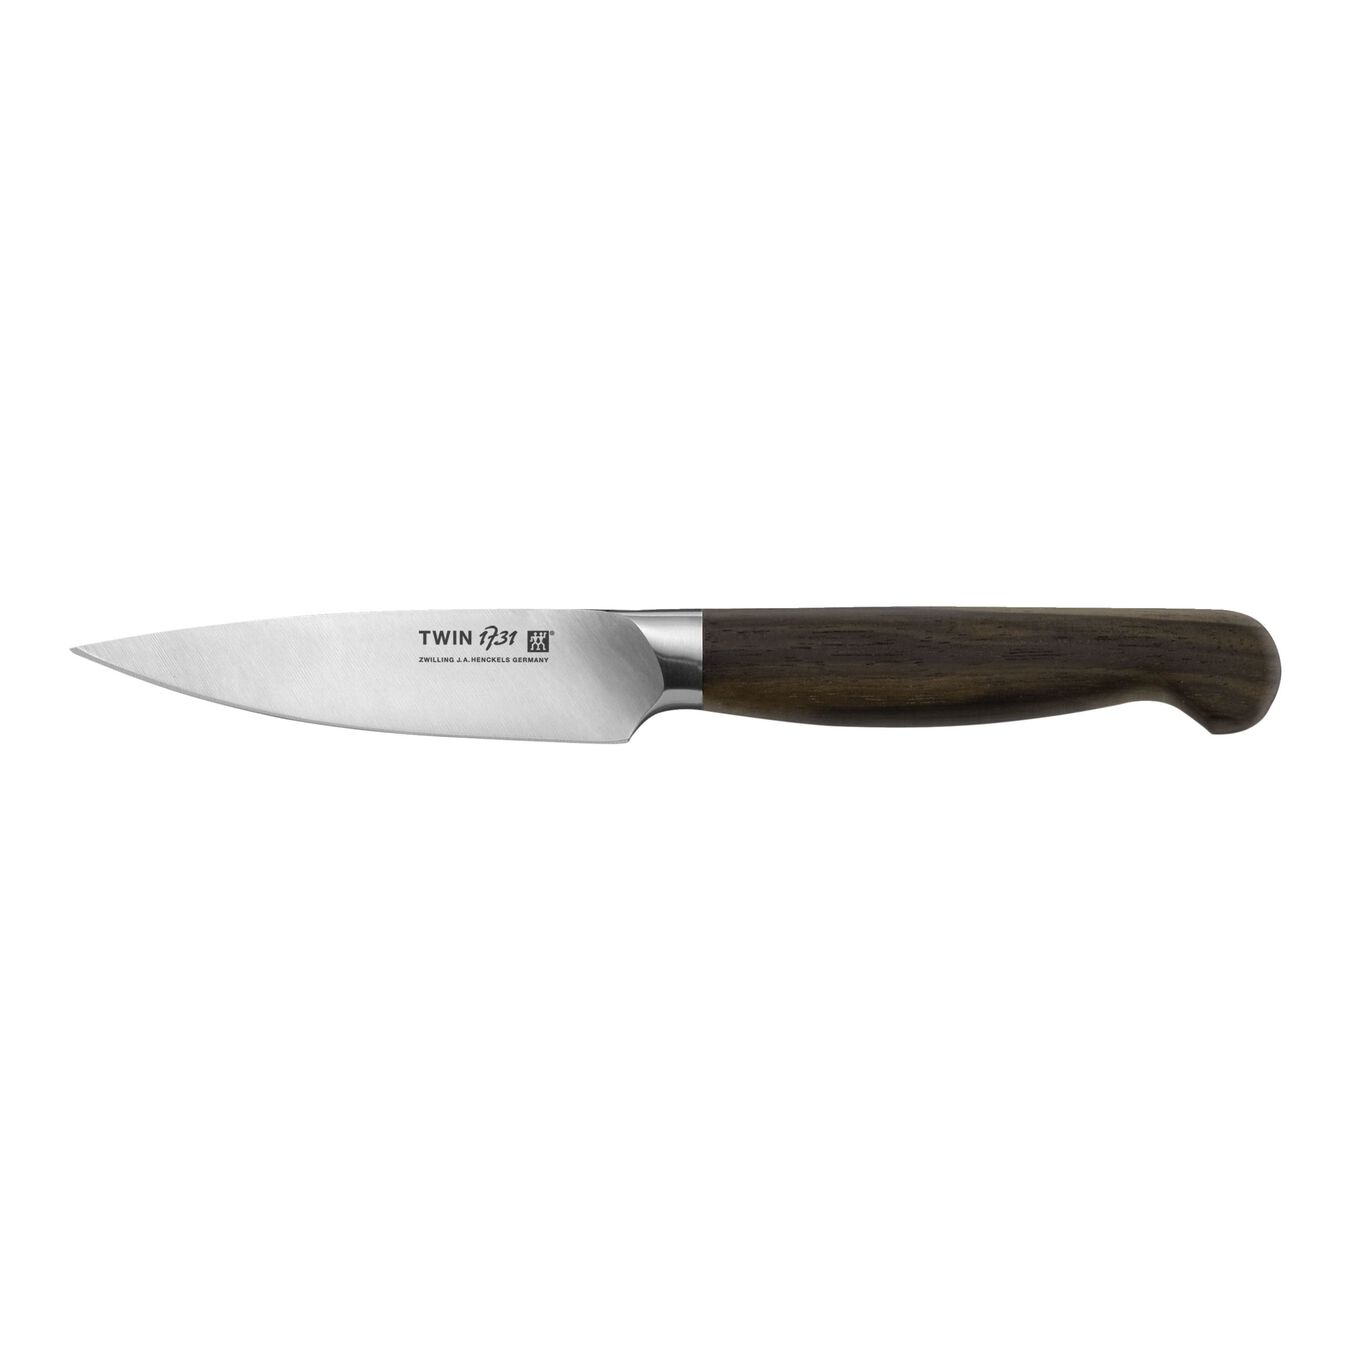 Zwilling twin 1731 - Alle Auswahl unter der Menge an Zwilling twin 1731